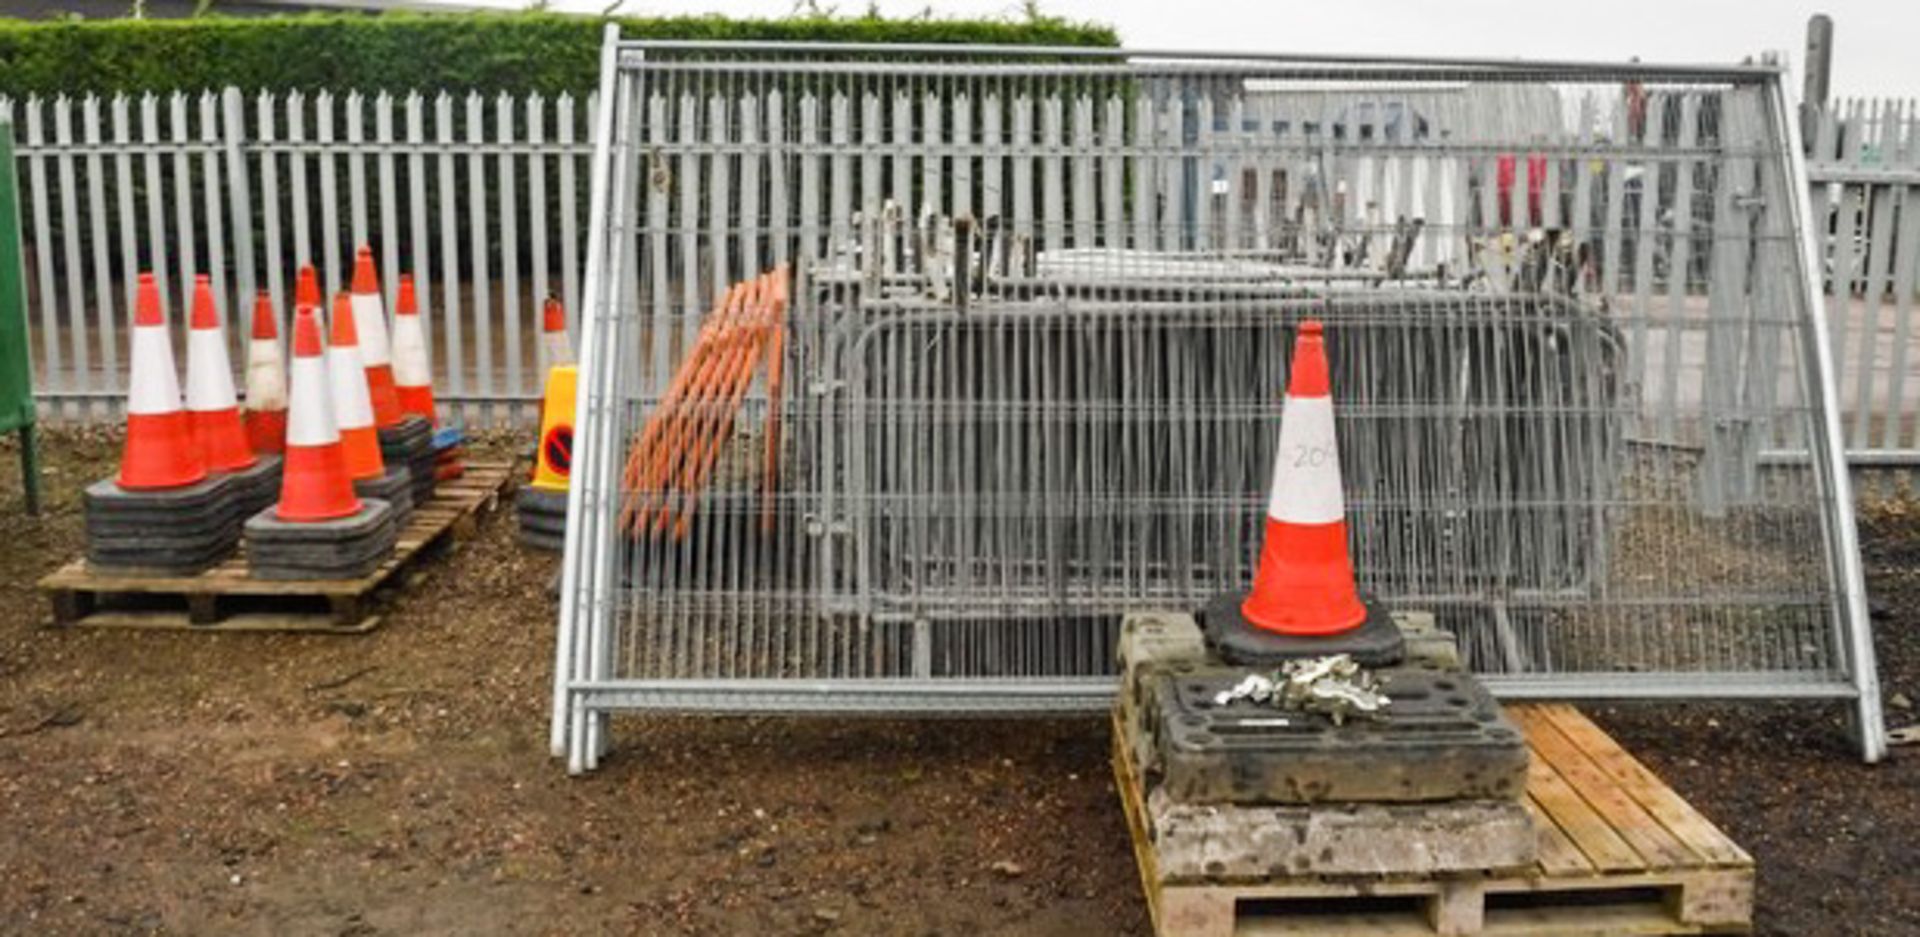 50 X GALVANISED HAND RAIL BARRIERS, 20 X HEAVY DUTY ROAD CONES, 6 X PLASTIC BARRIERS, 6 X HERES FENC